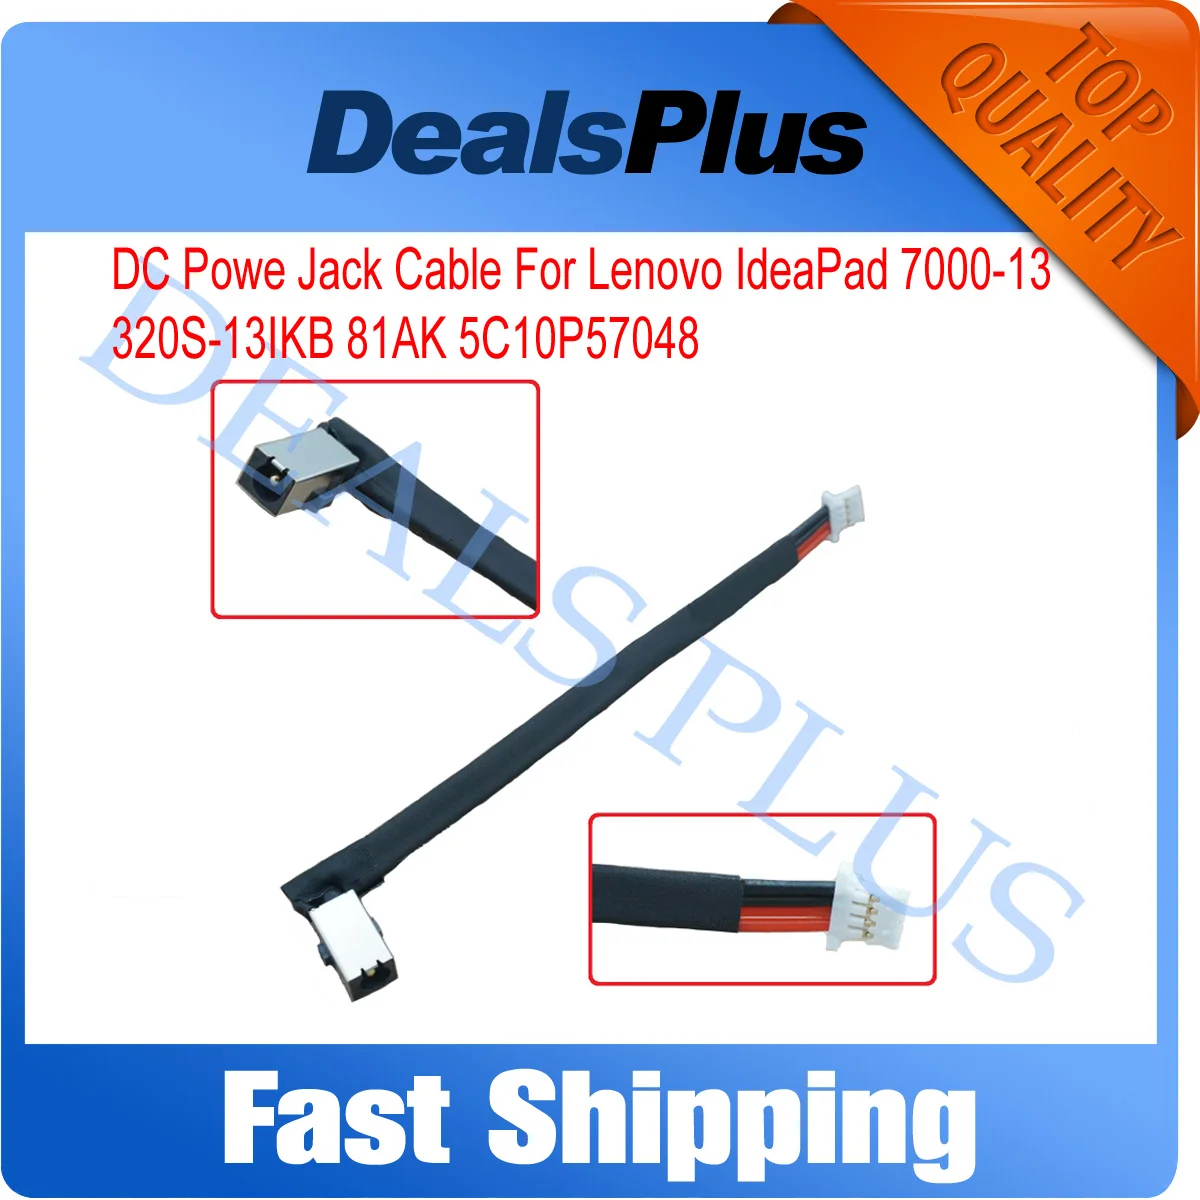 New Replacement DC Power Jack Cable For Lenovo IdeaPad 7000-13 320S-13IKB 81AK 5C10P57048